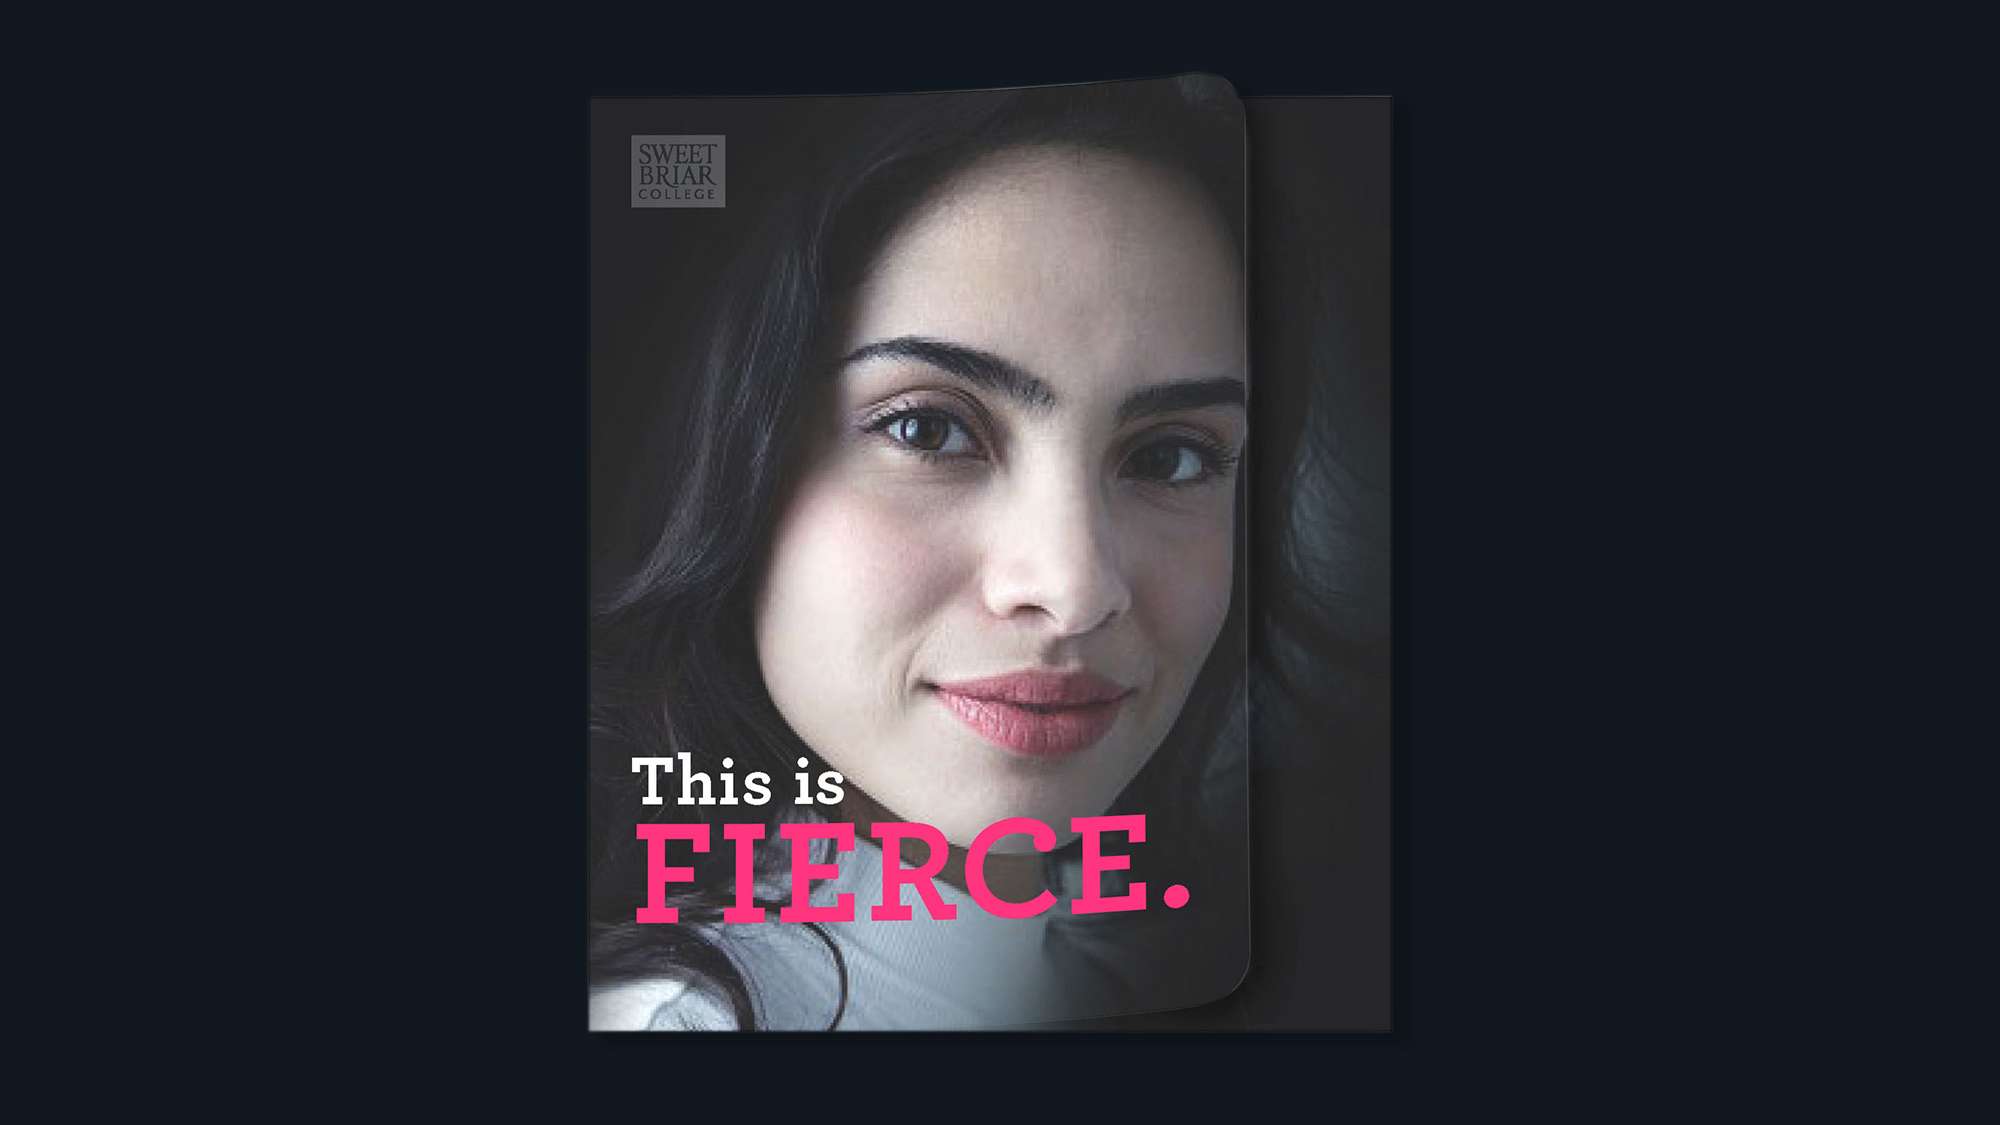 This is fierce. Viewbook cover with a confident college-age latina or white woman.